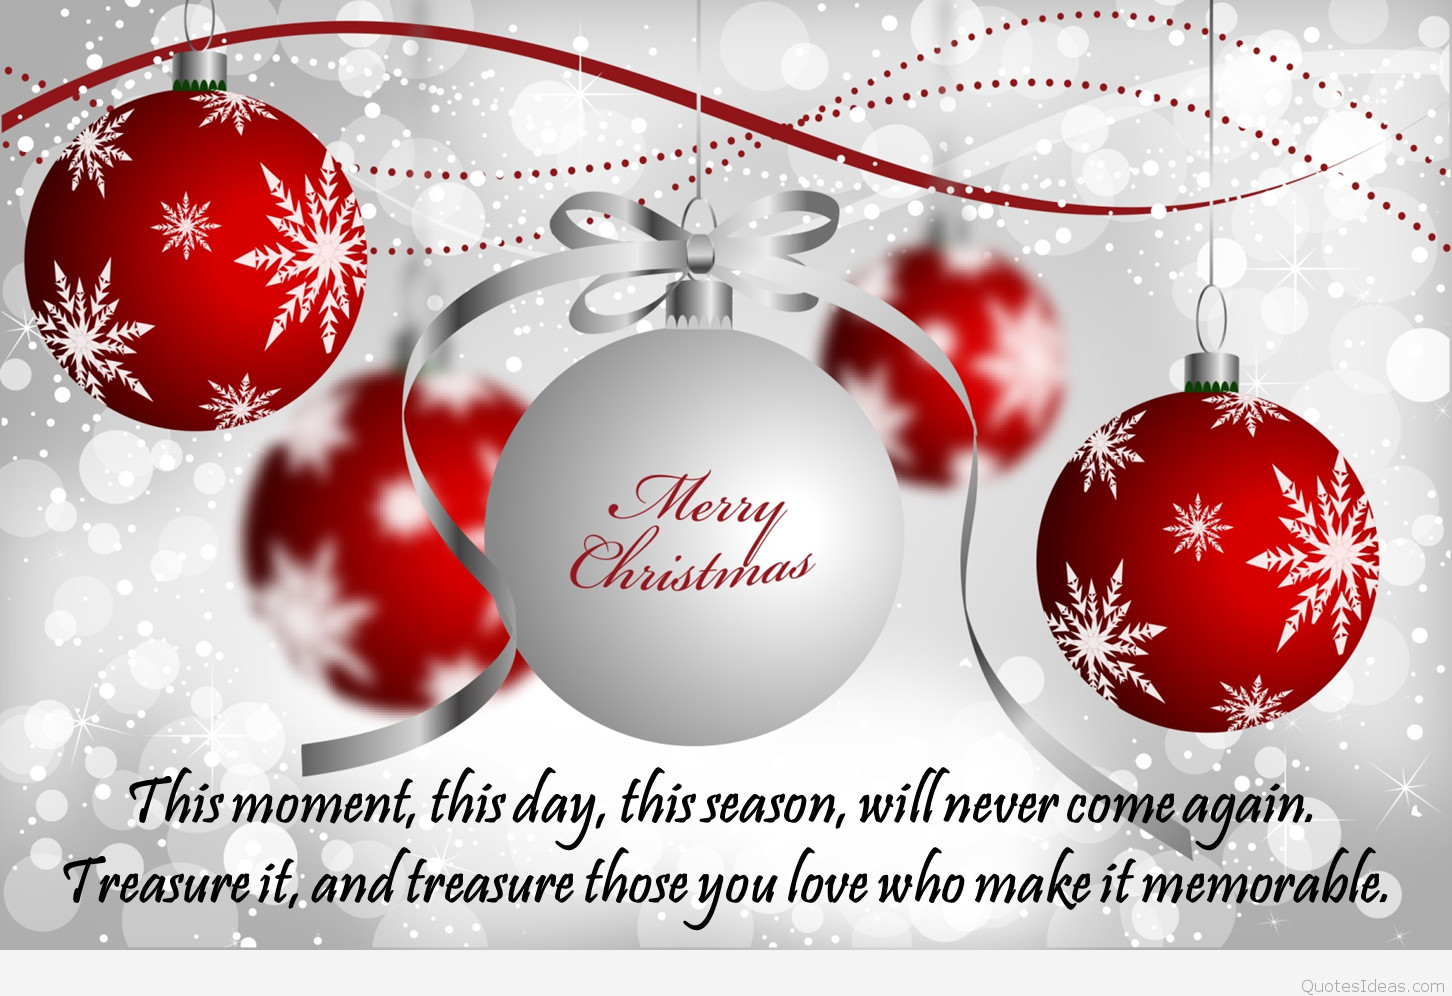 Merry Christmas Quotes For Cards
 Merry Christmas quotes